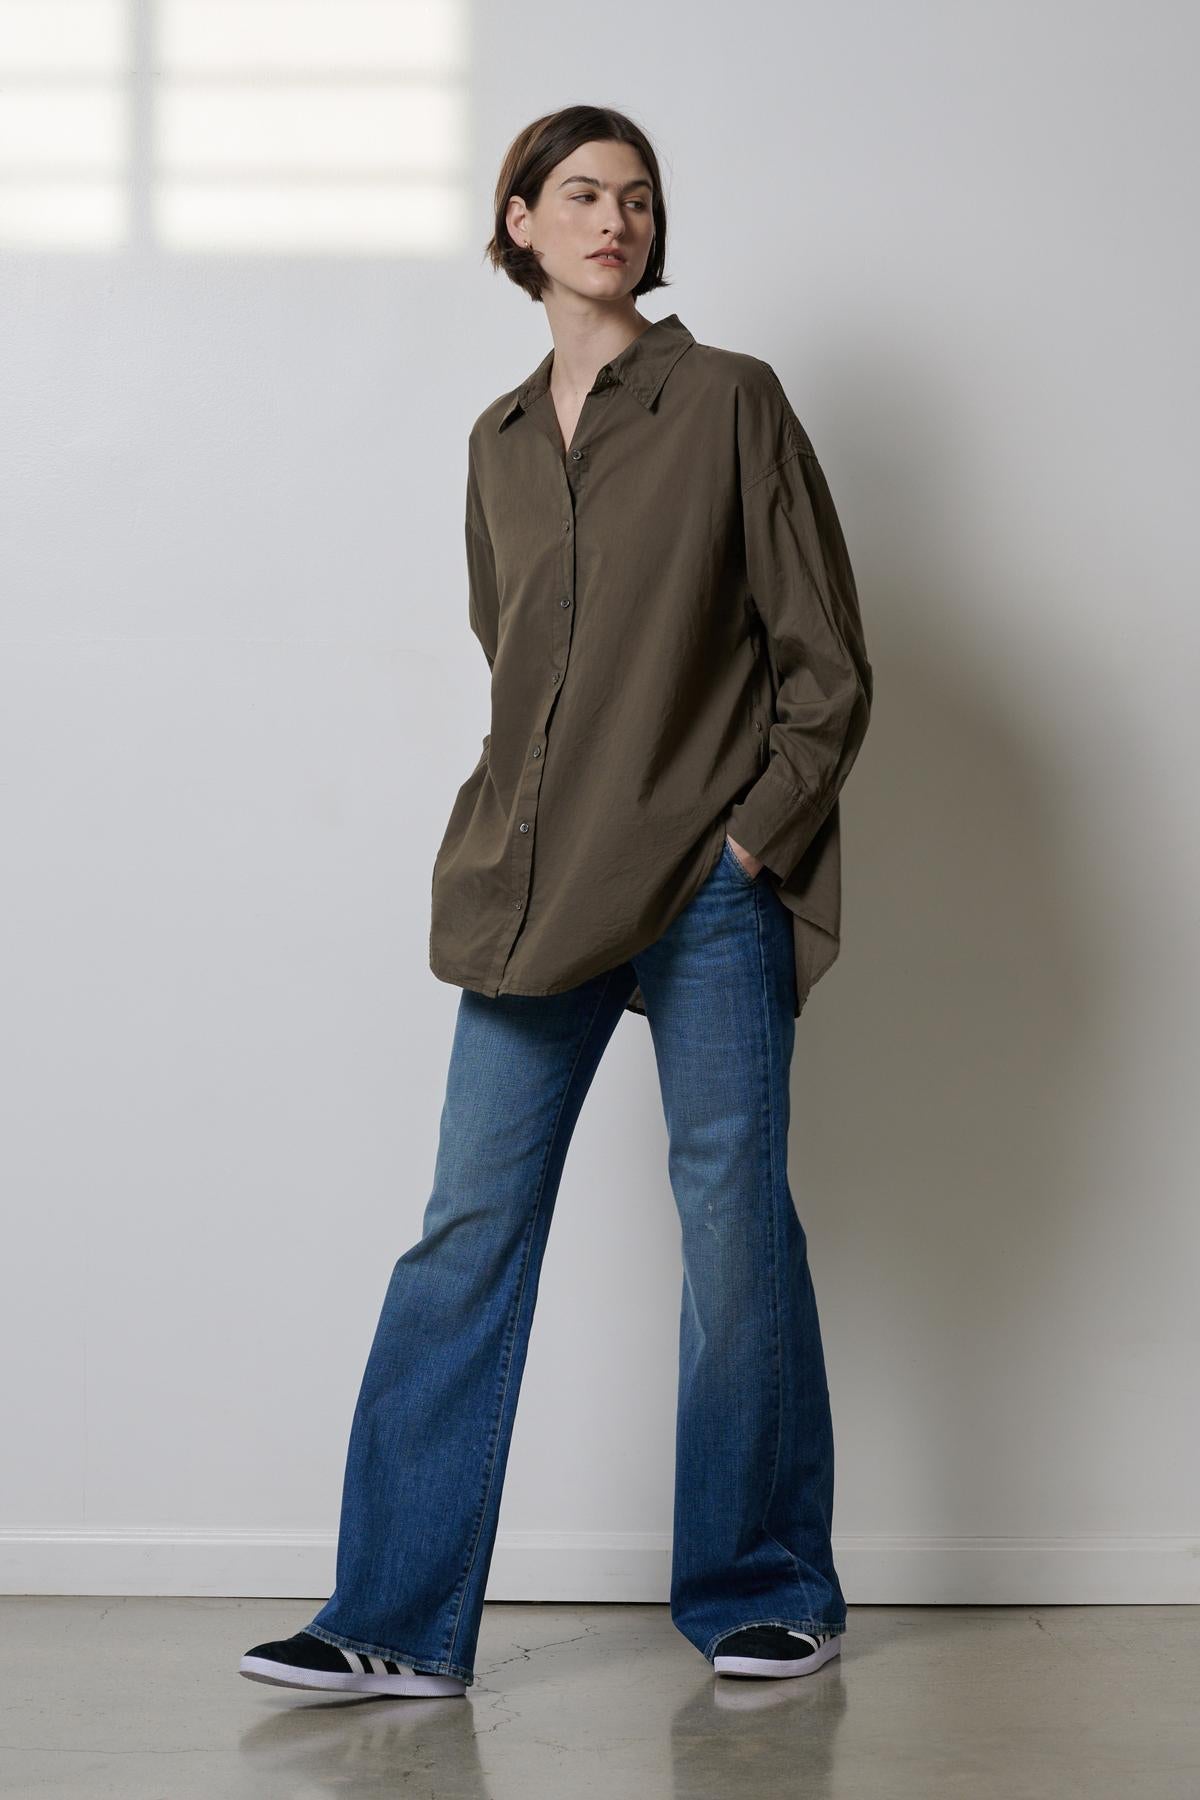   A woman is standing in a room wearing the REDONDO BUTTON-UP SHIRT by Velvet by Jenny Graham and oversized jeans. 